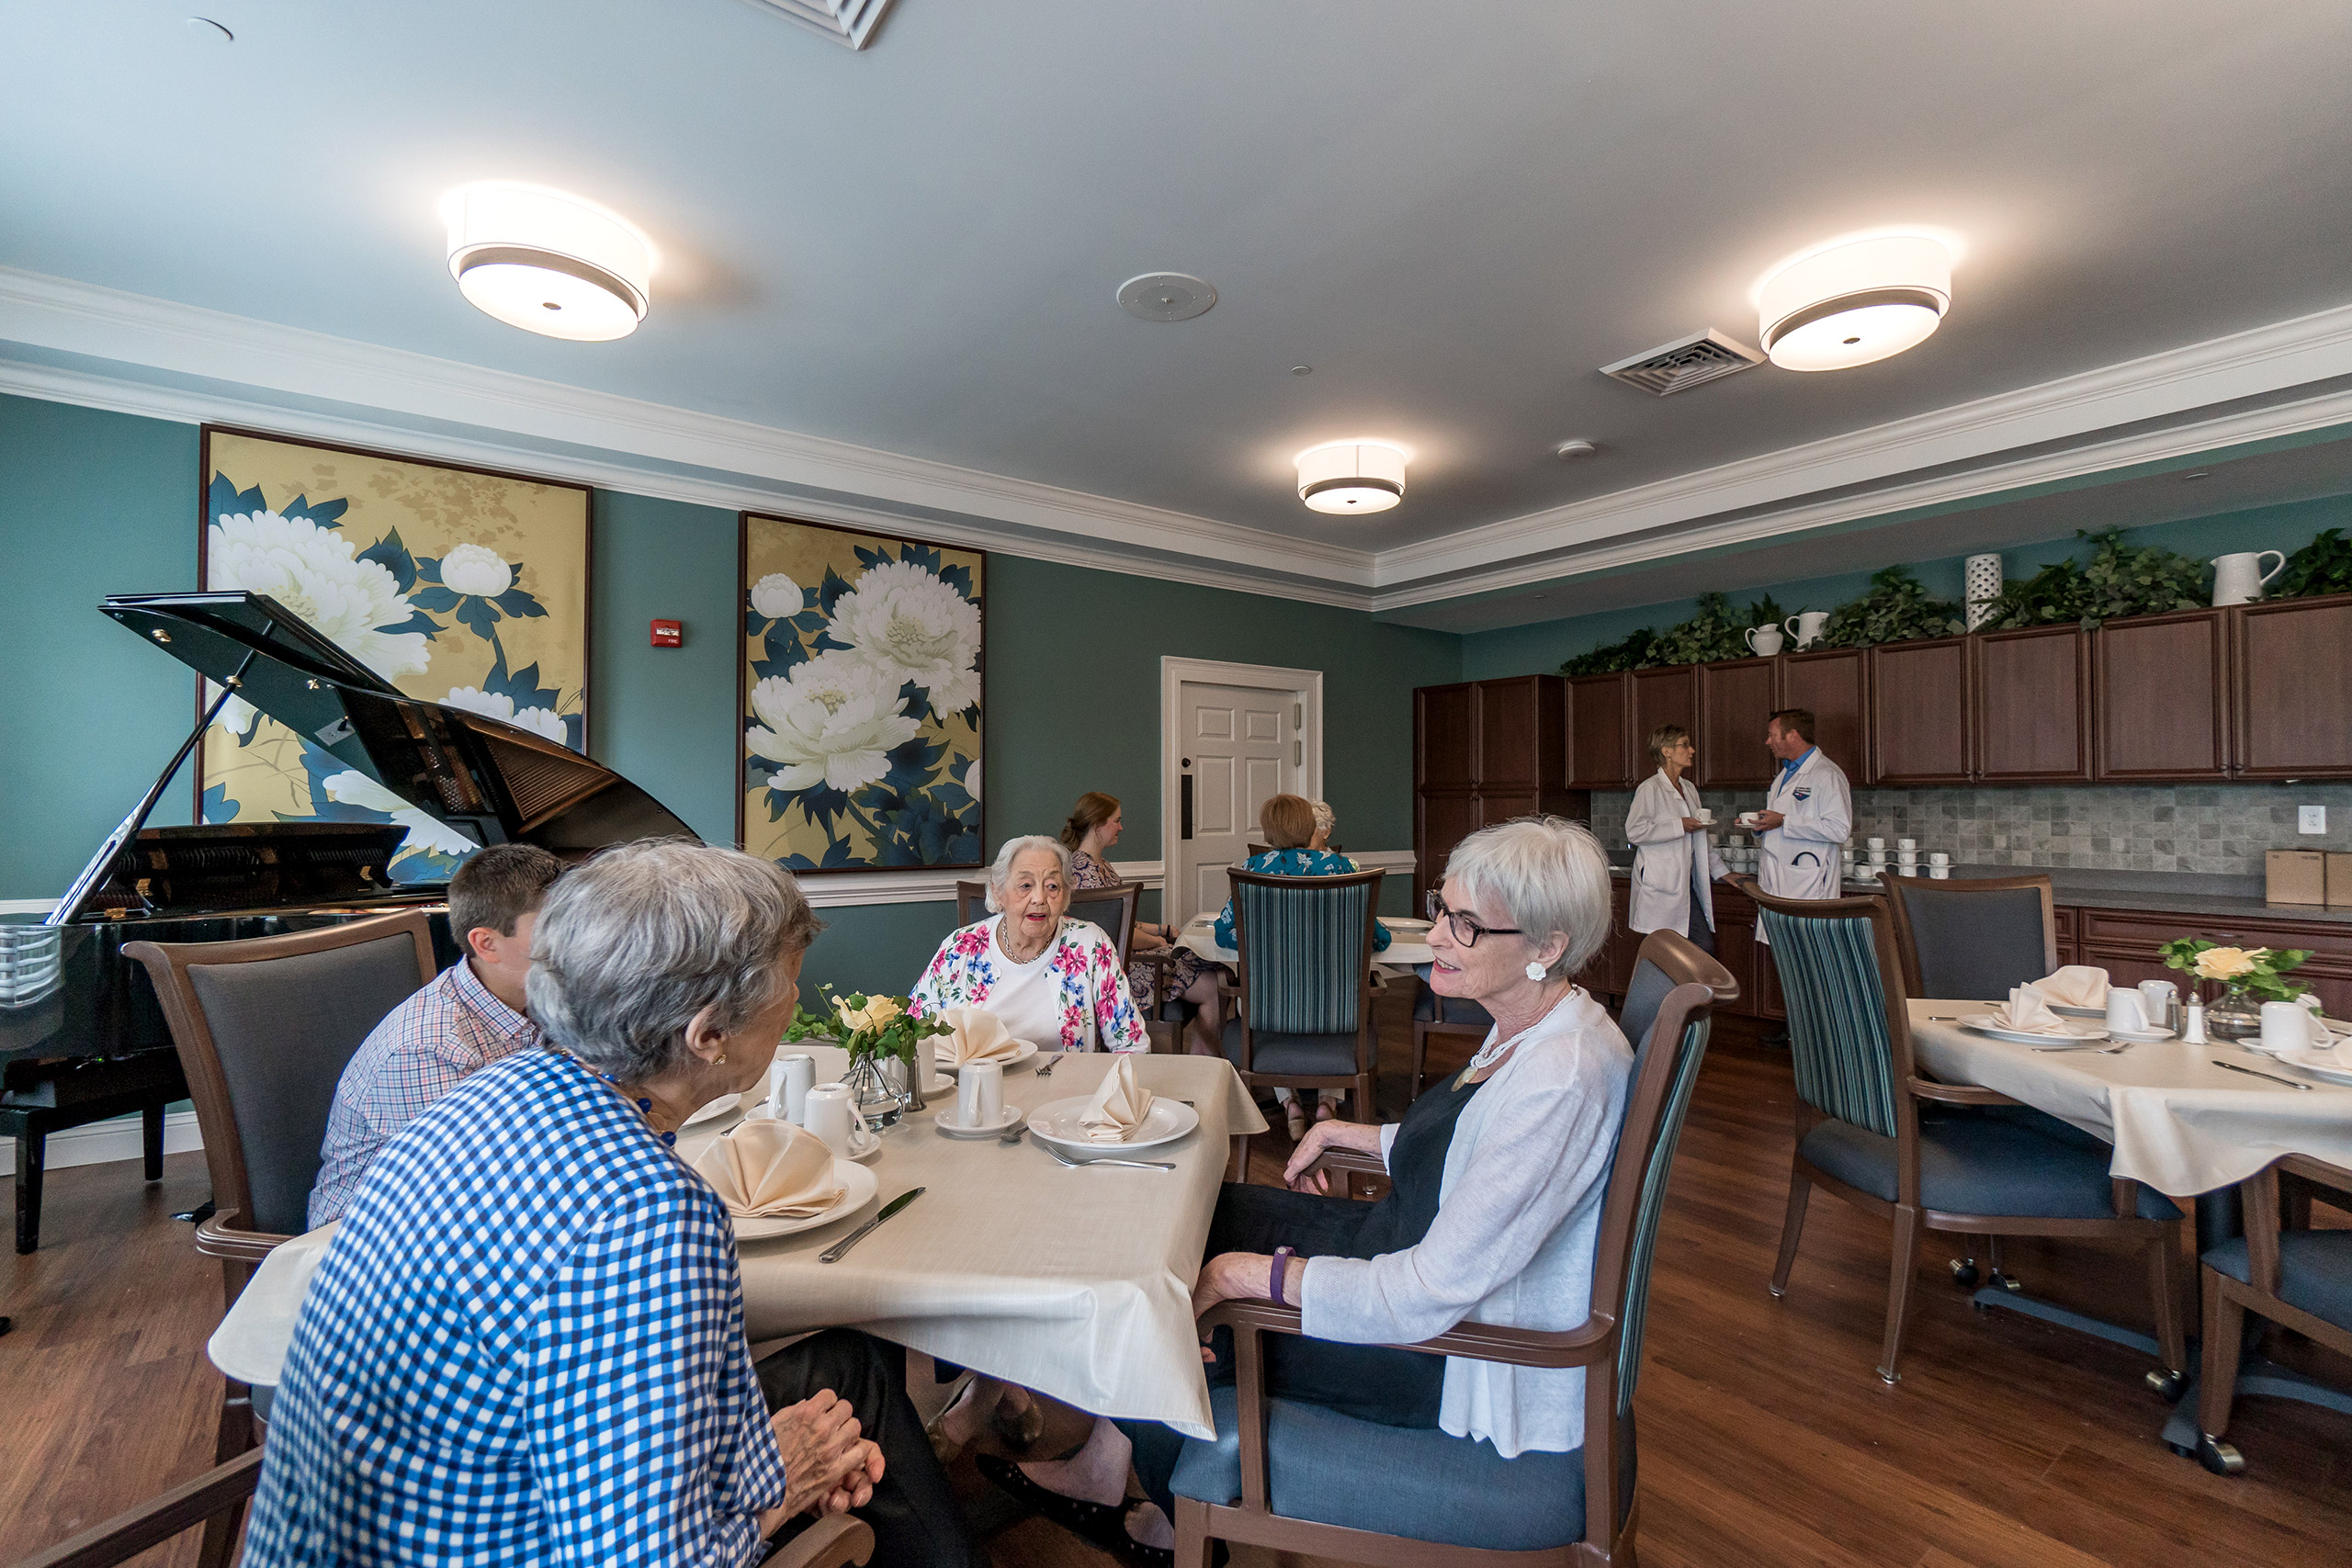 Residents and guests enjoying the main dining room